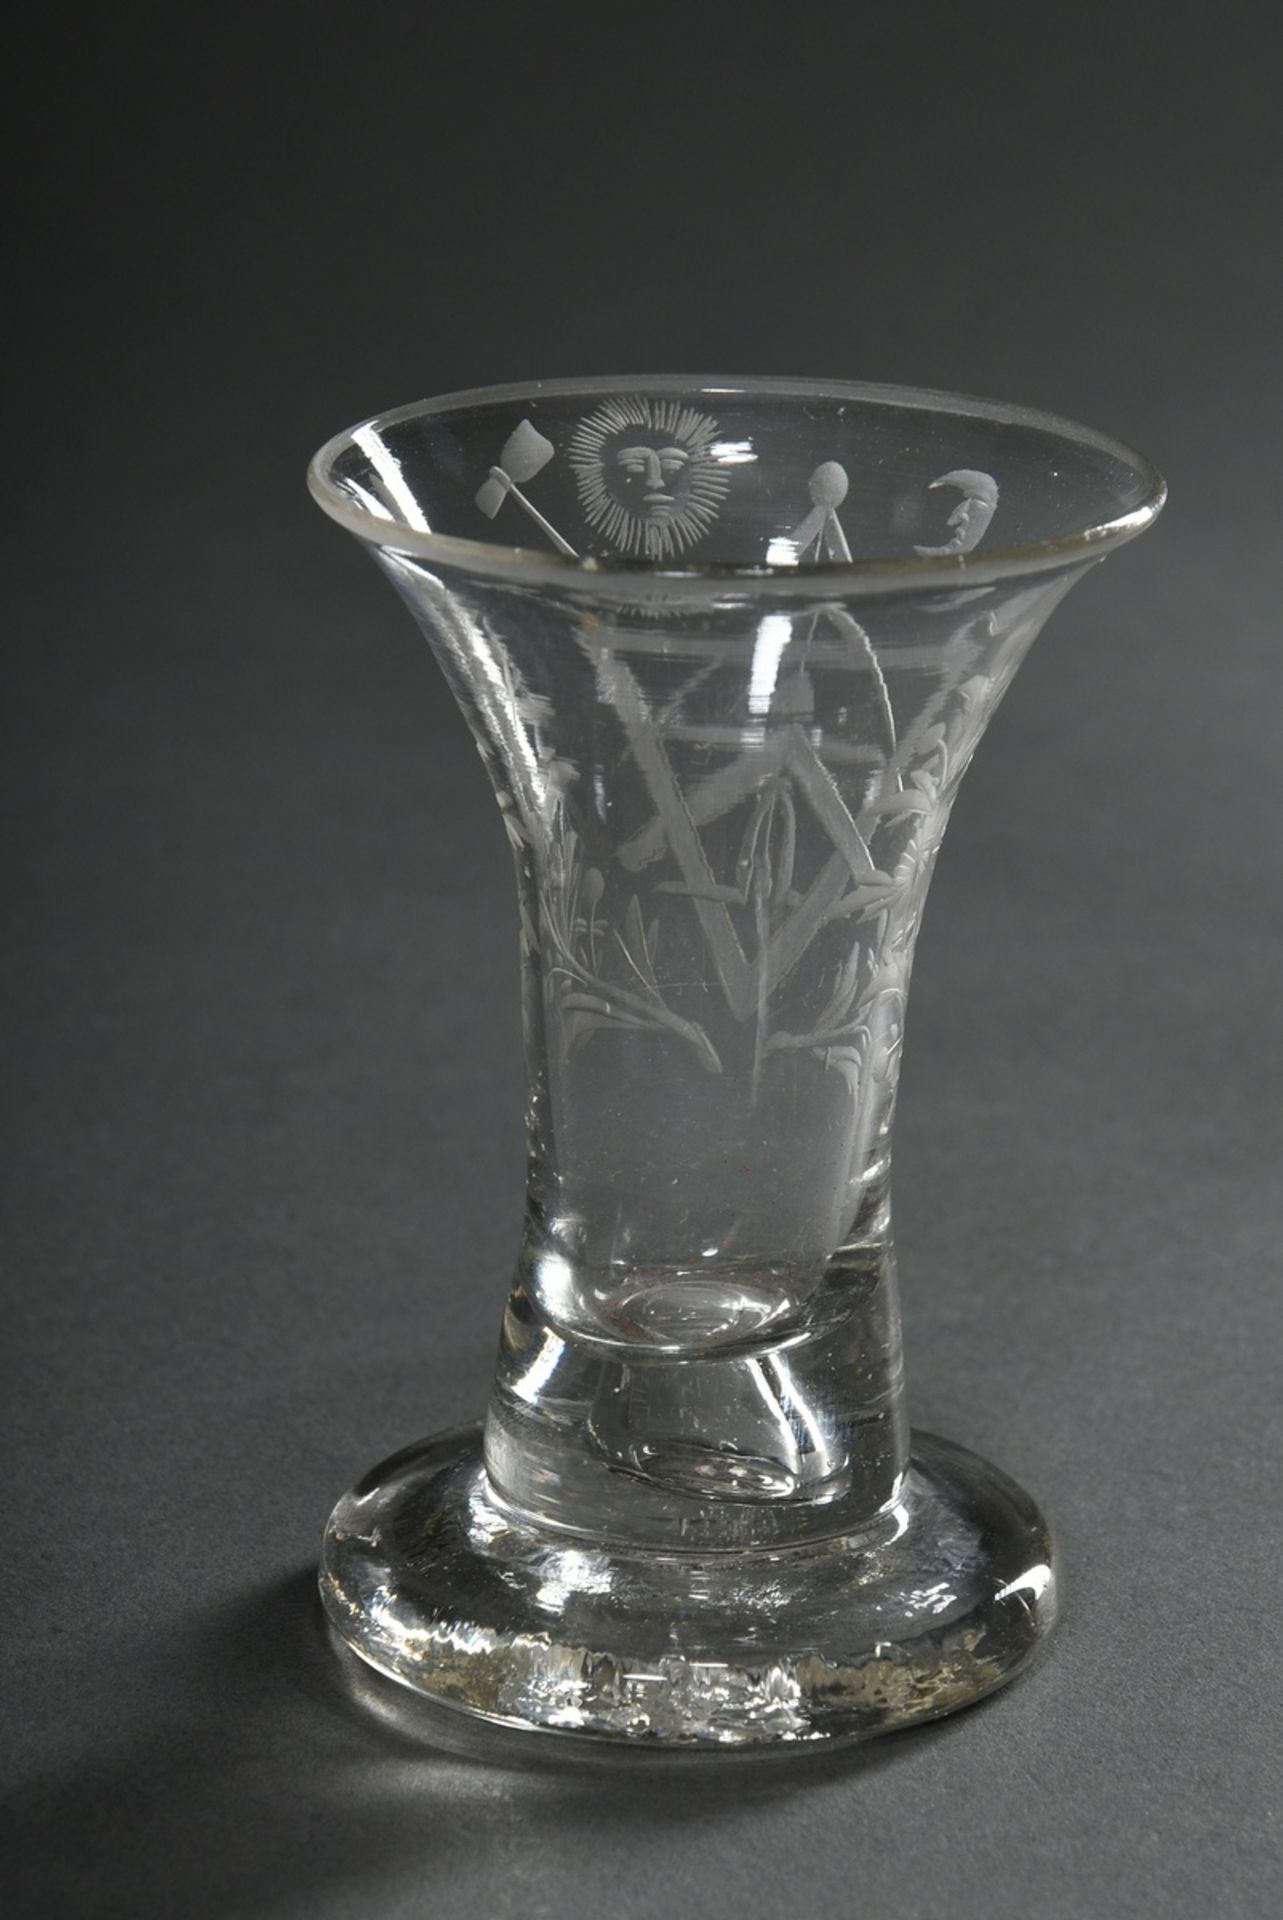 Freemason schnapps glass with funnel-shaped dome and cut symbols in bow cartouche, probably Zechlin - Image 2 of 3